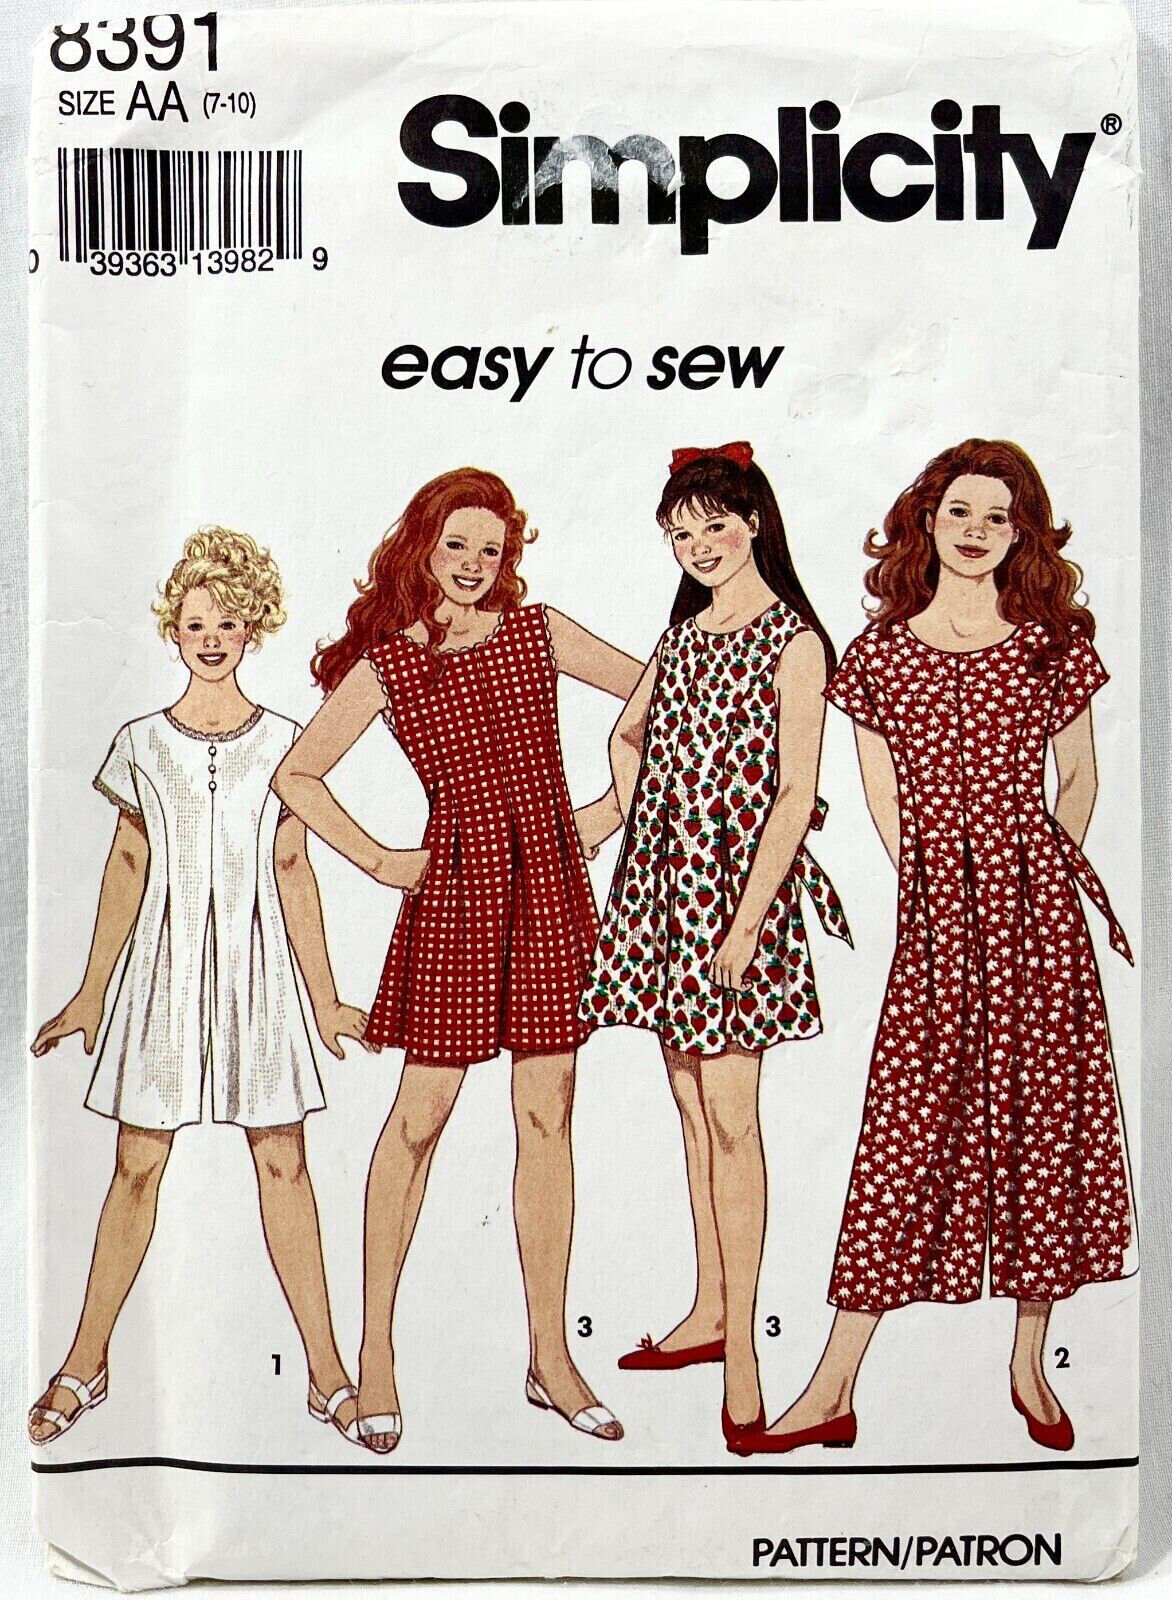 1993 Simplicity Sewing Pattern 8391 Girls Jumpsuit 3 Lengths Size 7-10 Vtg 11979